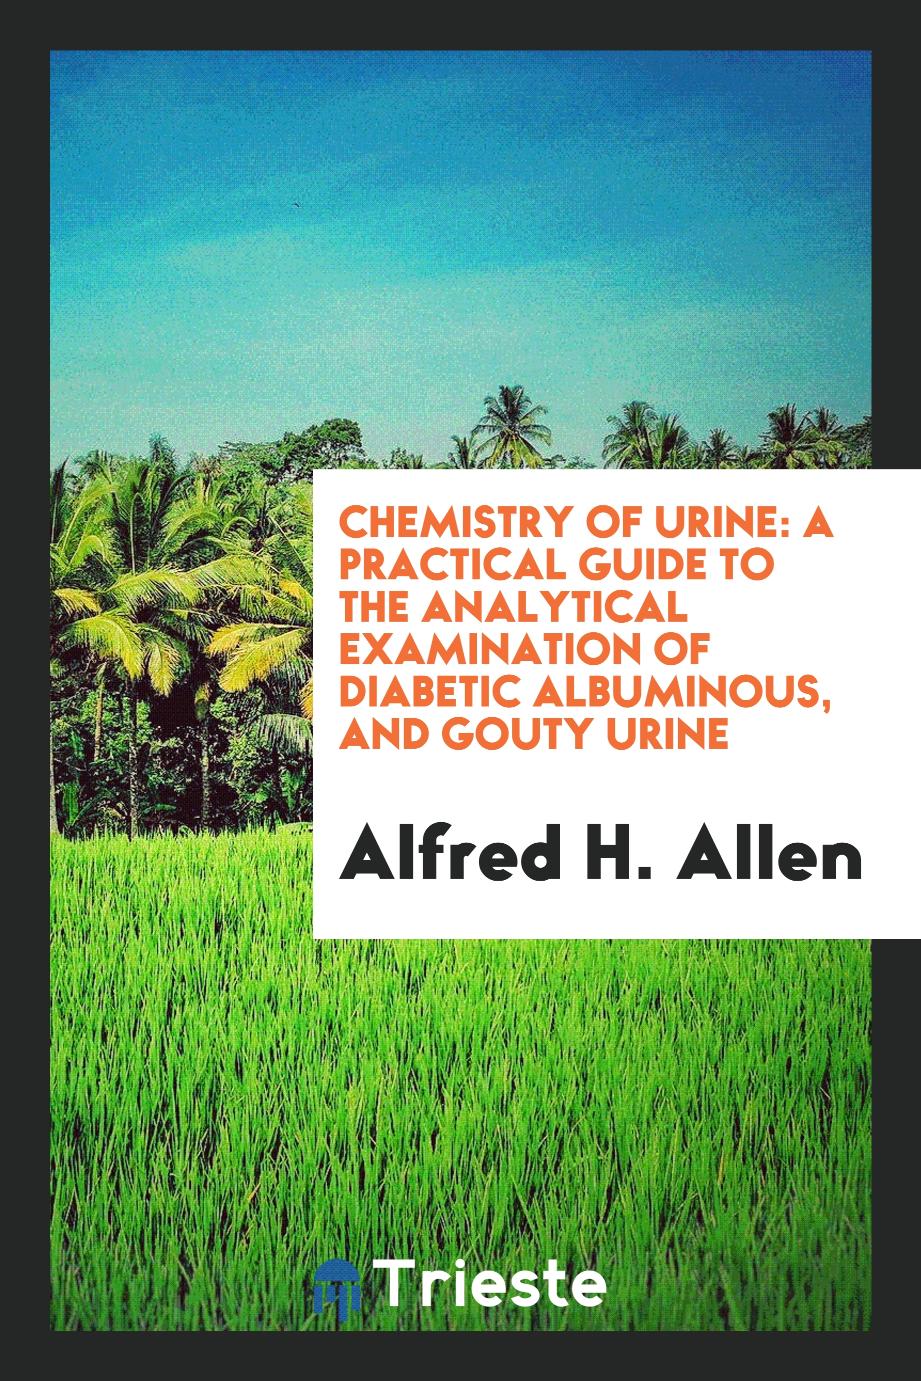 Chemistry of Urine: A Practical Guide to the Analytical Examination of Diabetic Albuminous, and Gouty Urine